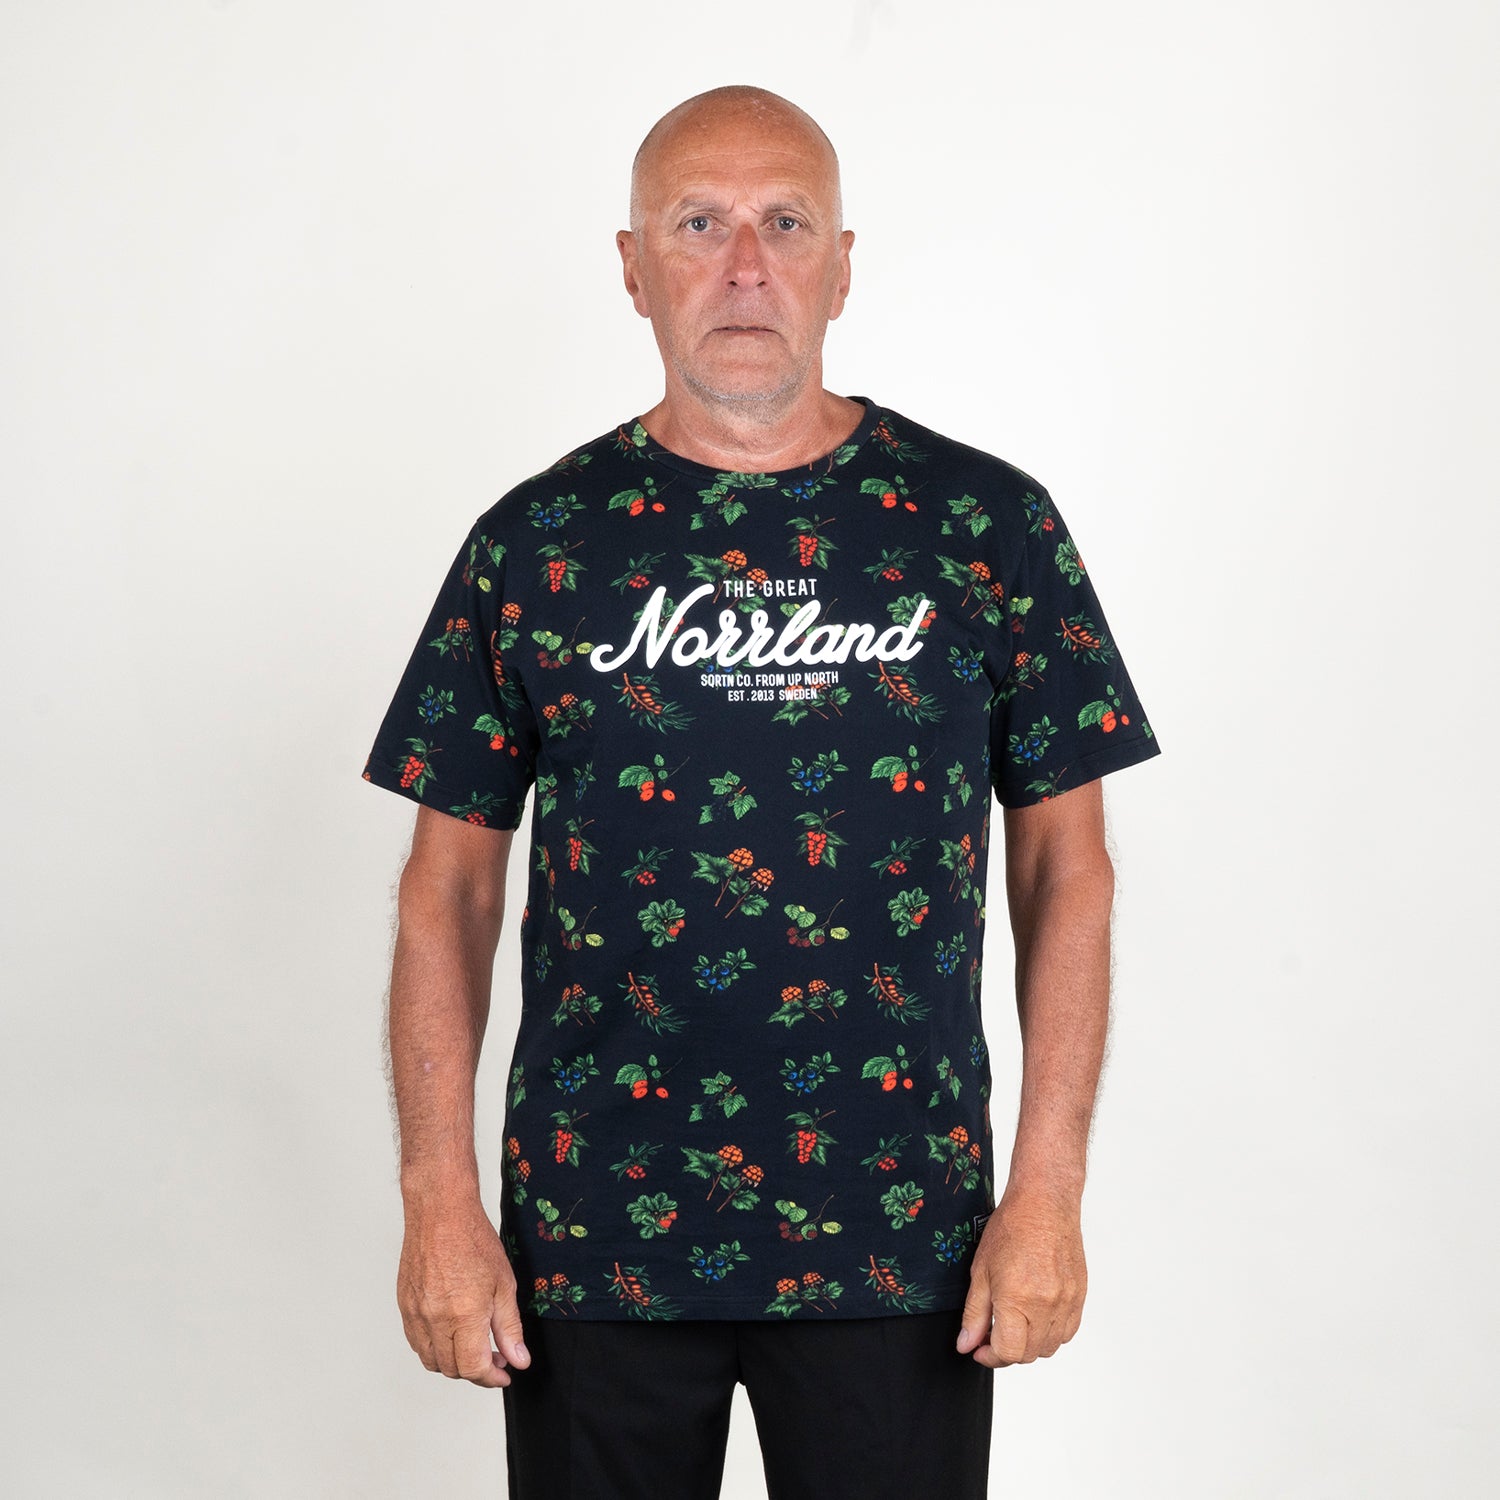 GREAT NORRLAND T-SHIRT - BERRY BLACK